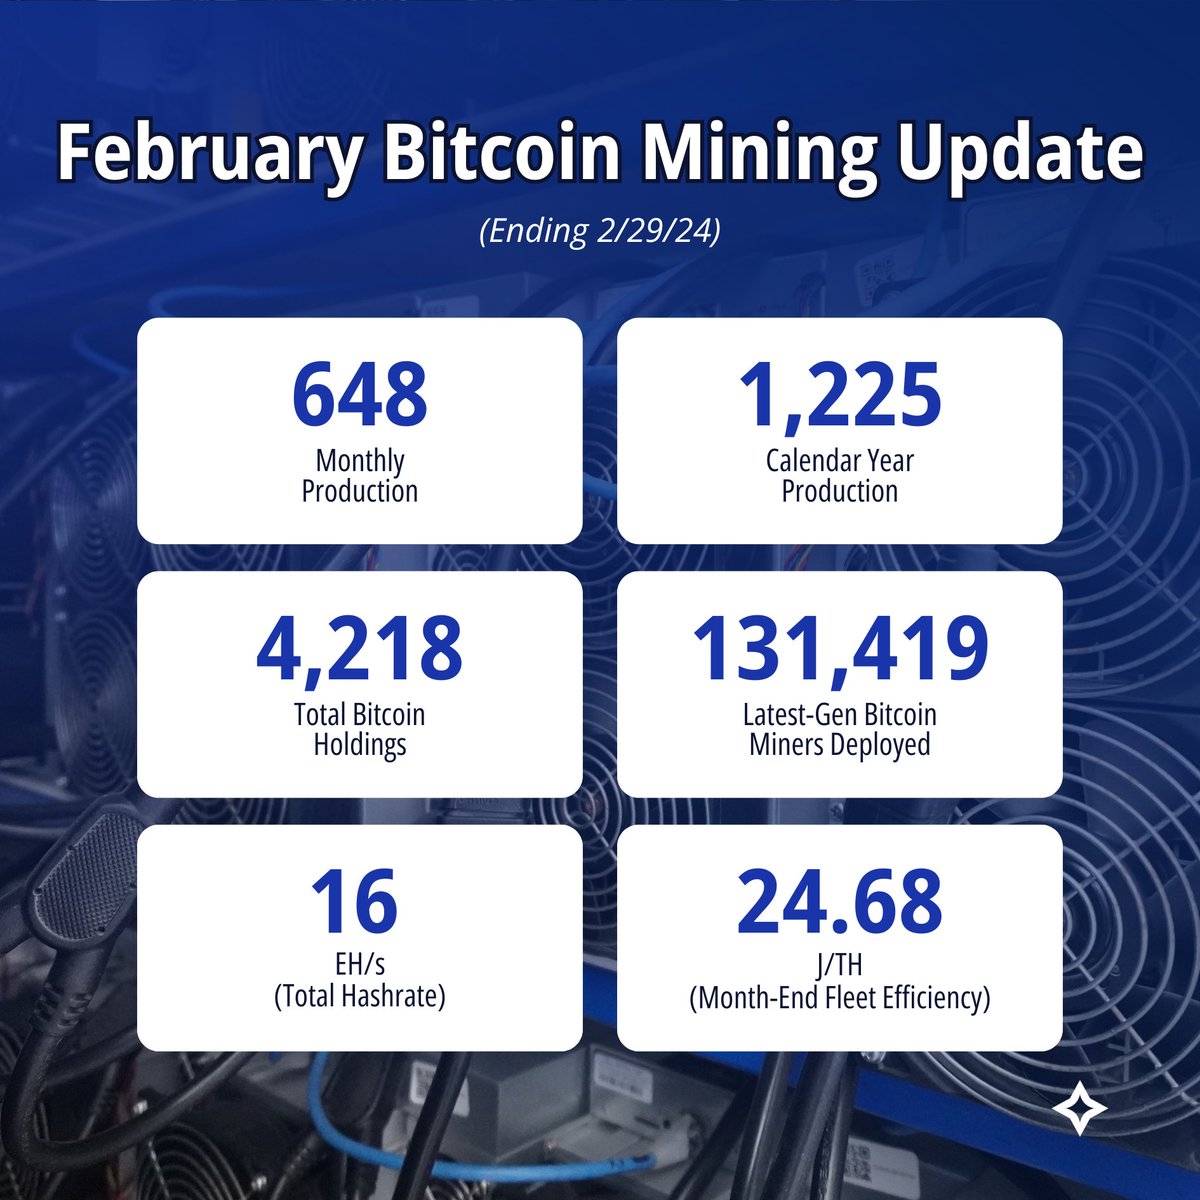 February was a shorter month, but nothing short of incredible. Our #hashrate grew 60% to exceed 16 EH/s and our monthly production increased by 12%. *Bitcoin mined: 648 *Total #BTC holdings: 4,218 *Deployed fleet: 131,419 *Month-end fleet #efficiency: 24.68 J/TH *Current…